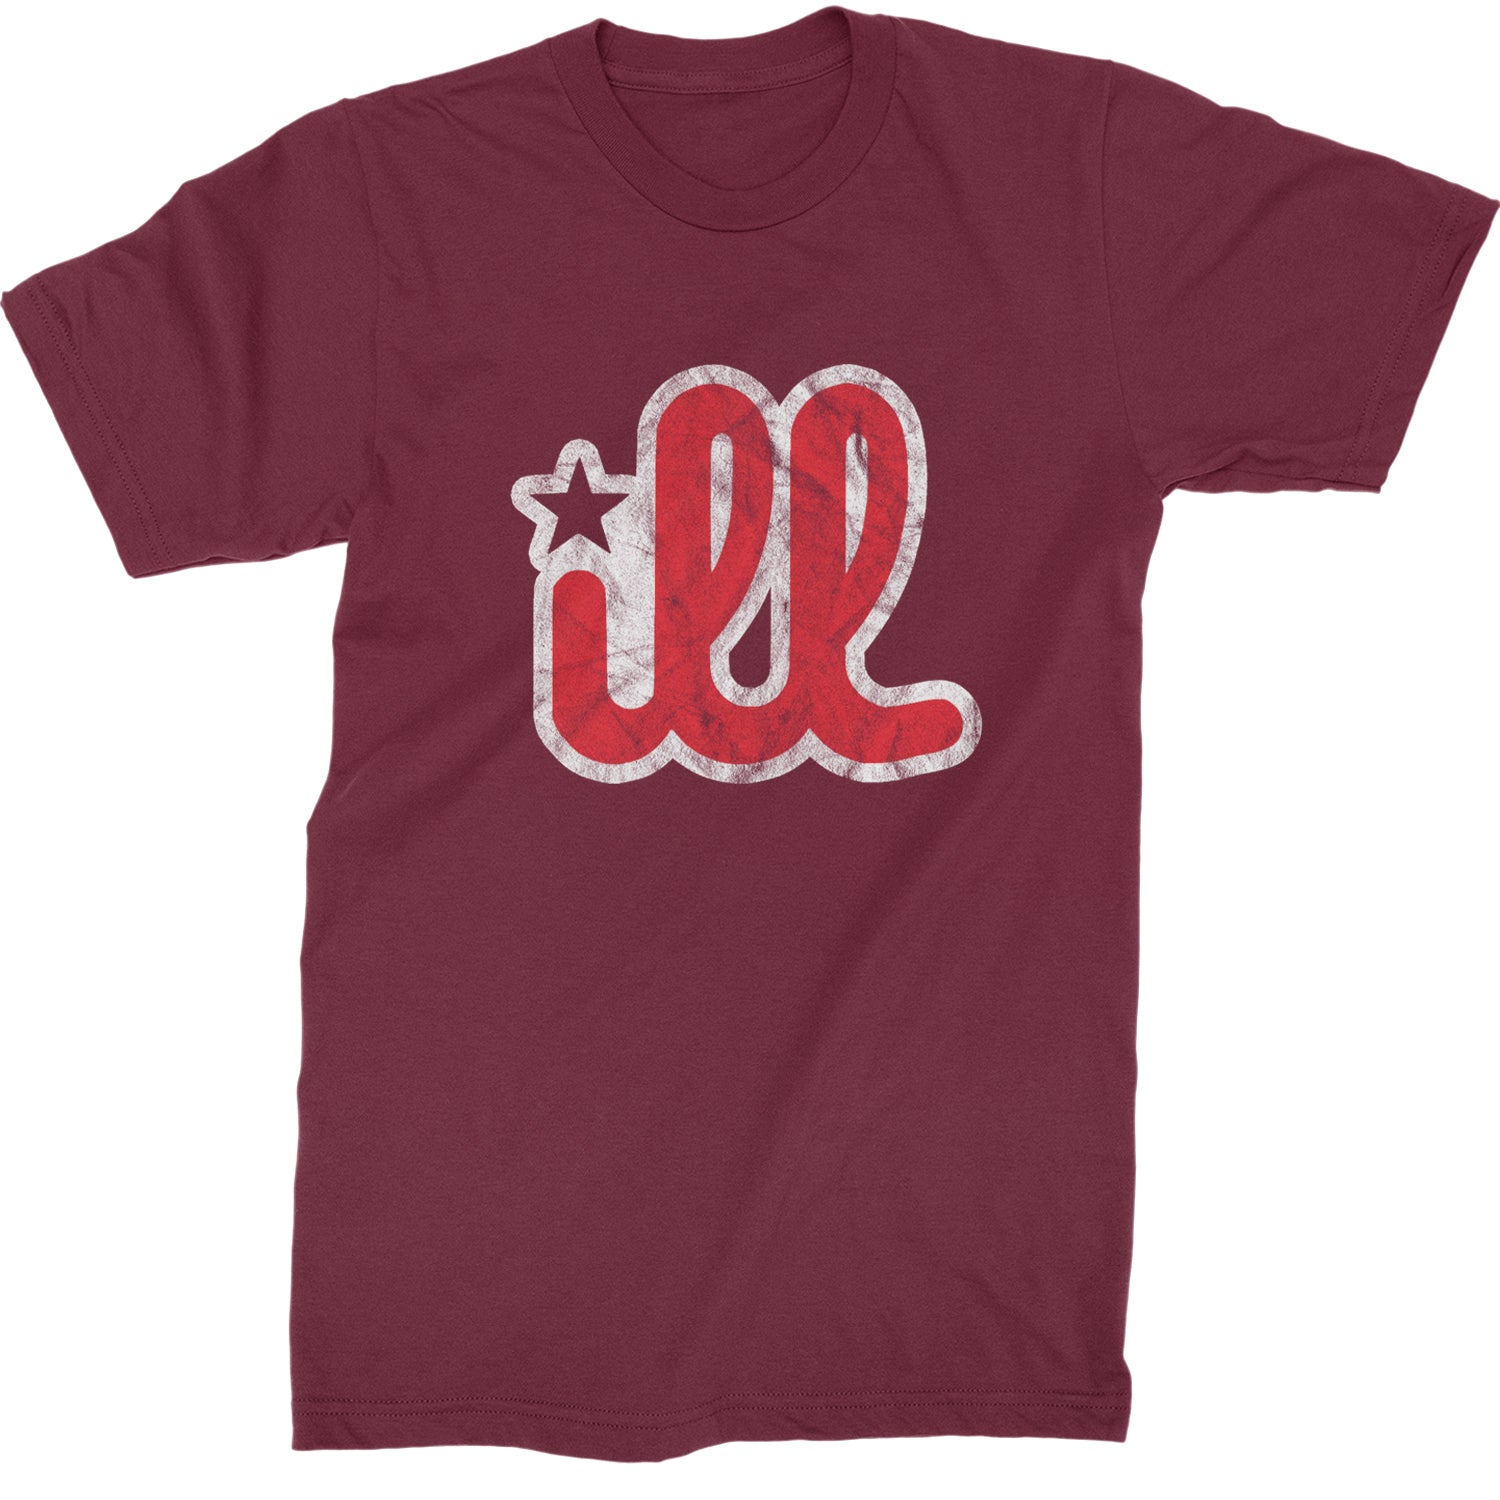 ILL Vintage It's A Philadelphia Philly Thing Mens T-shirt Maroon